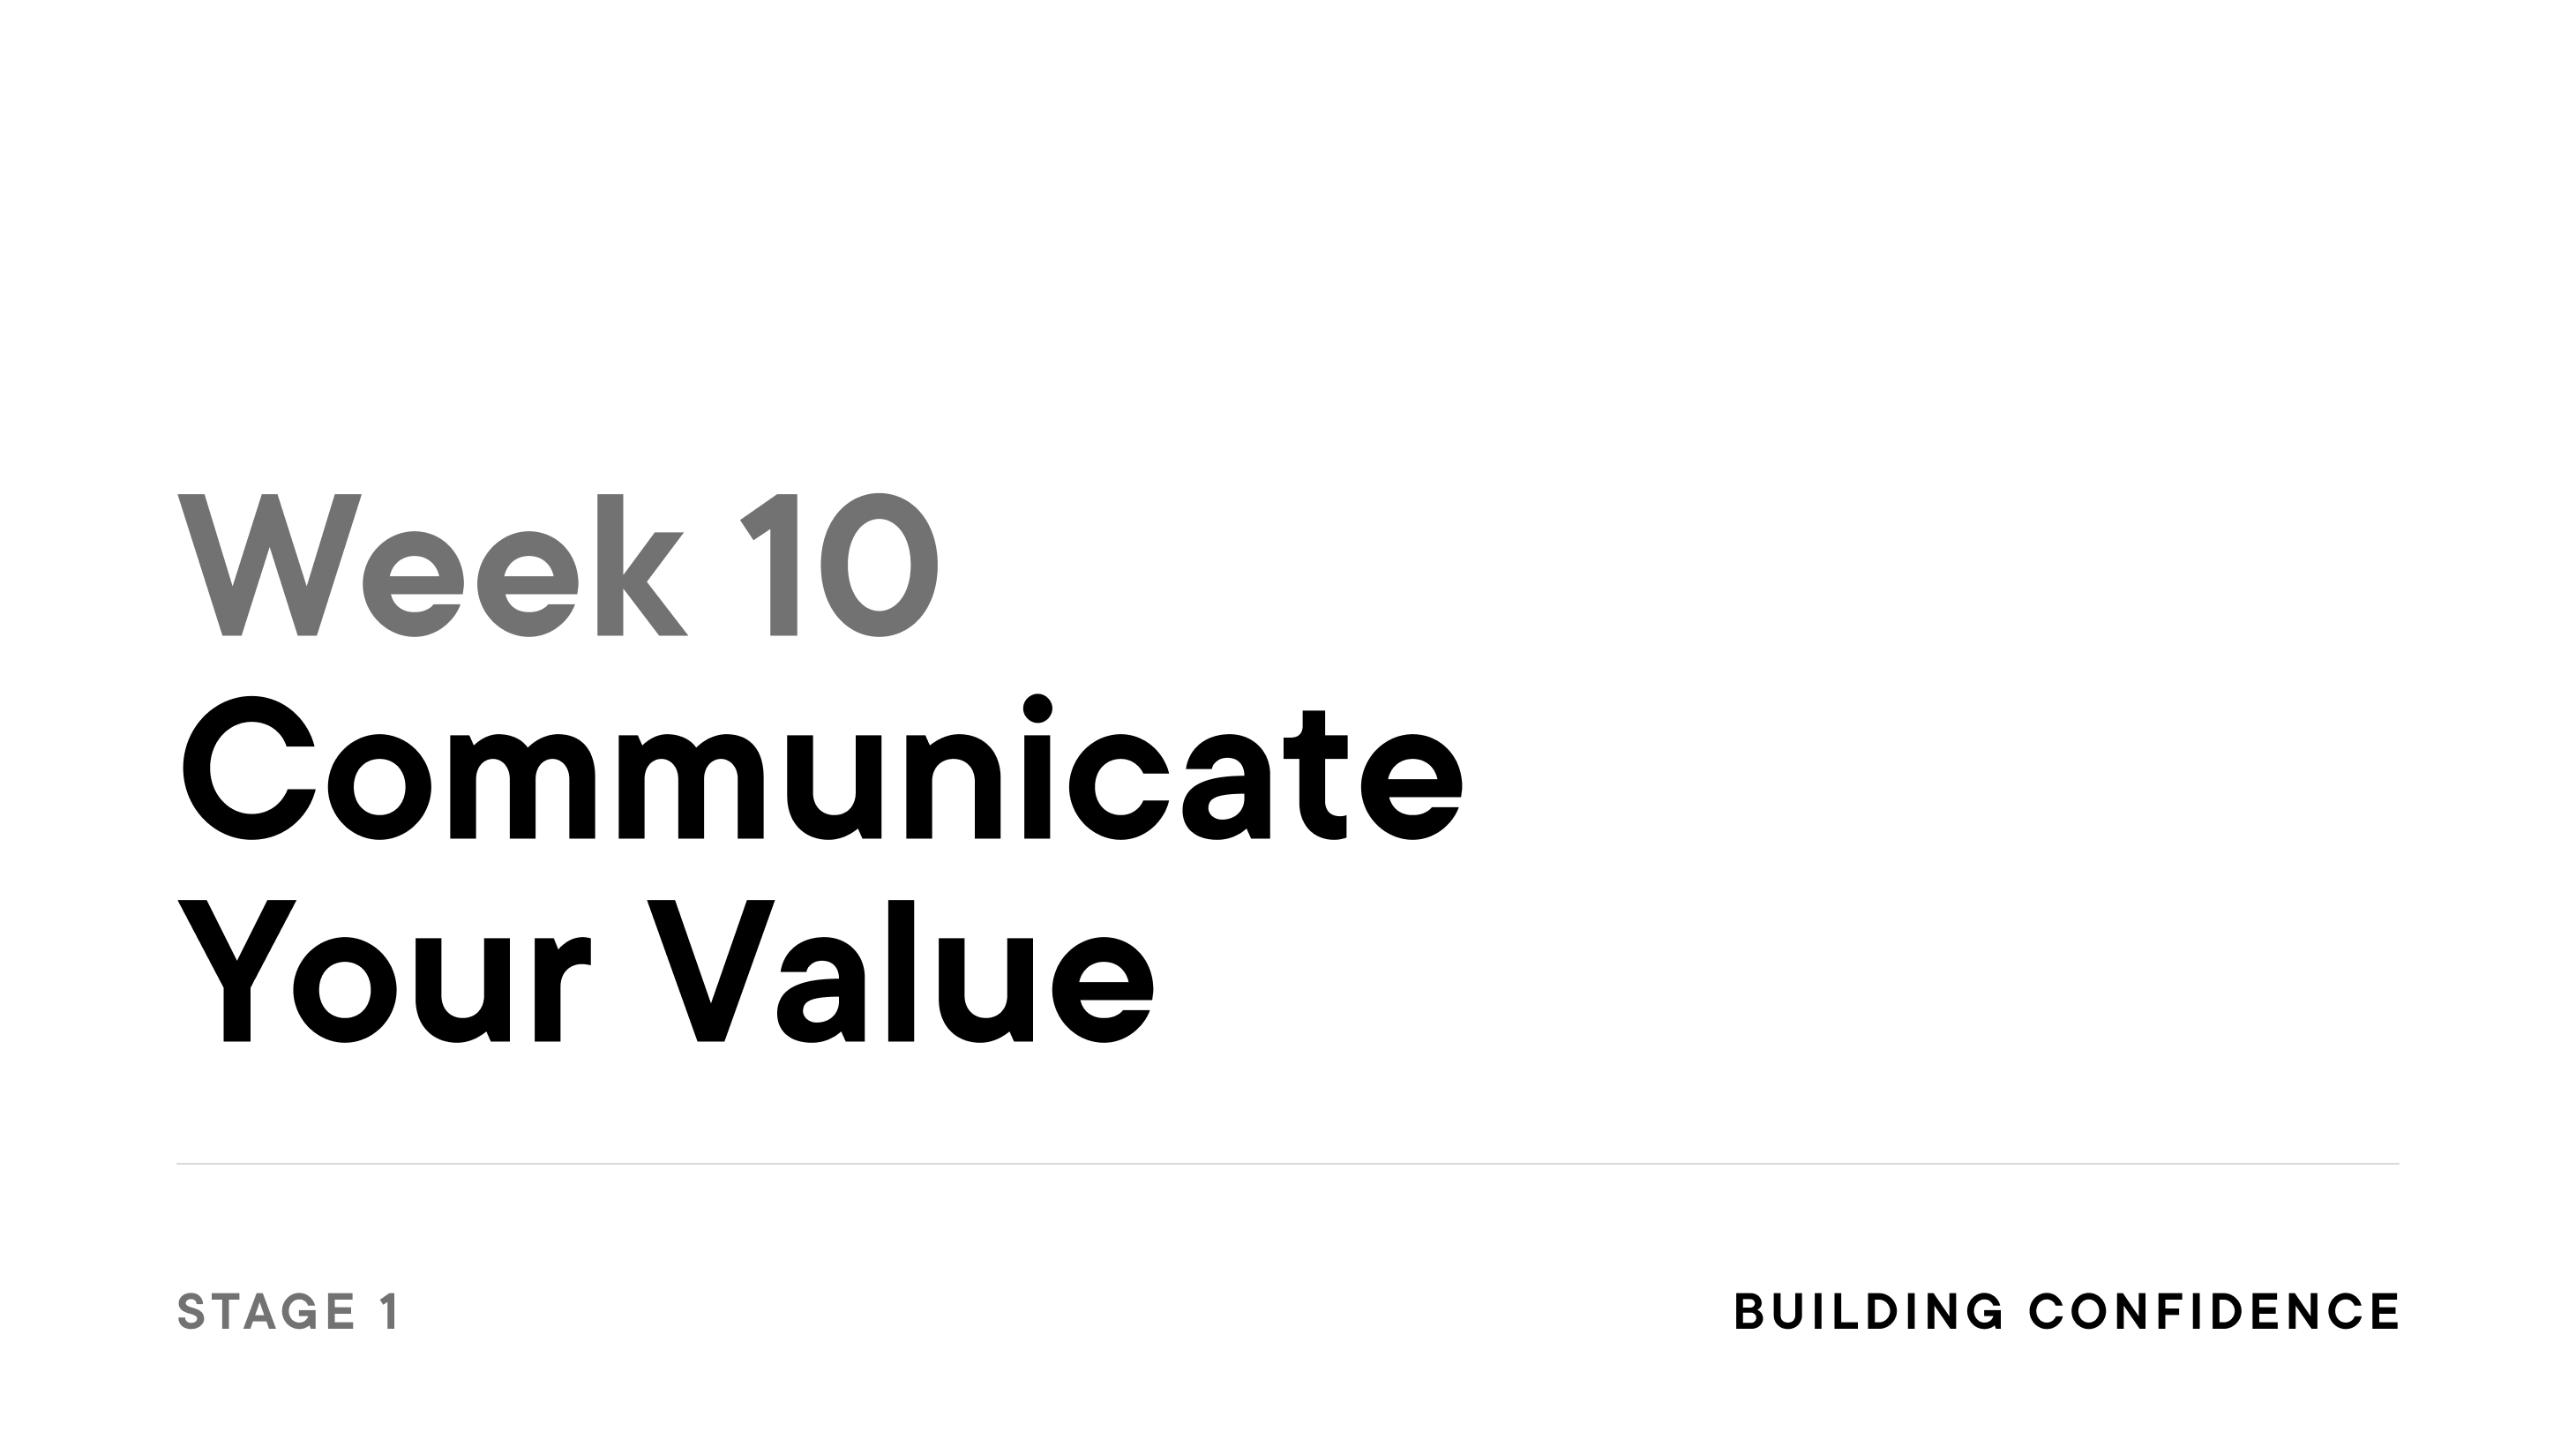 Week 10: Communicate Your Value